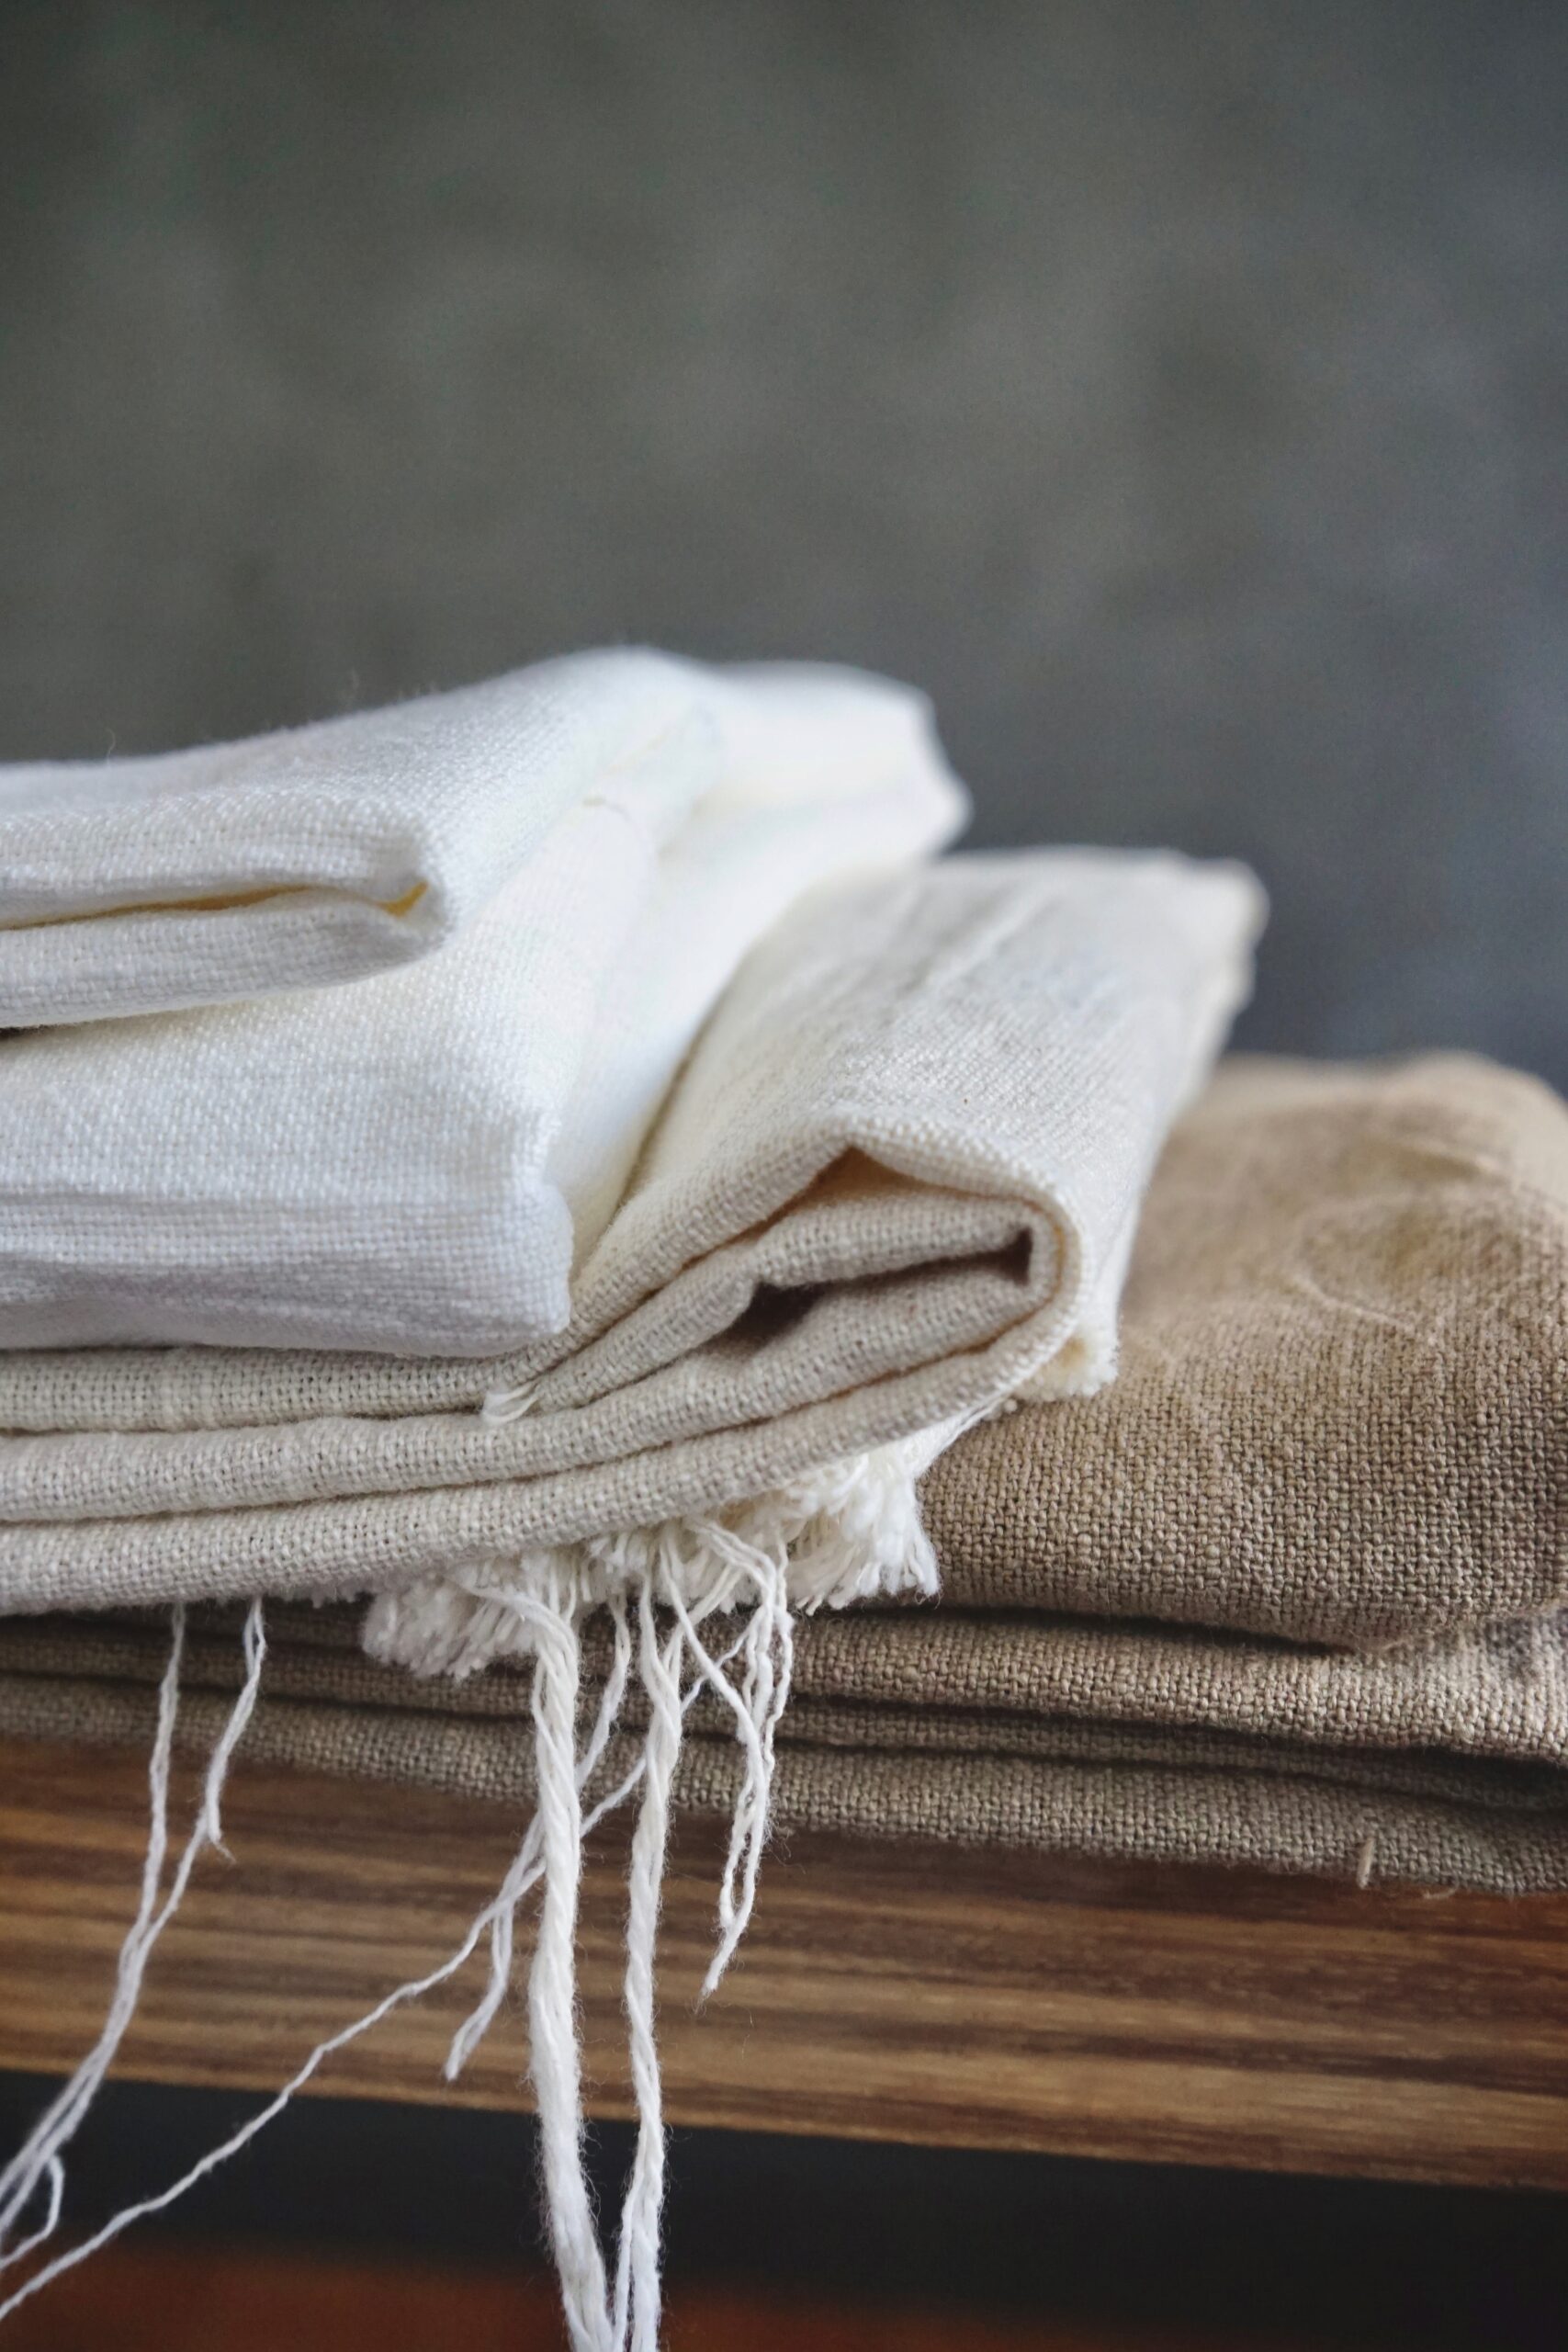 Facts about the quality of linen